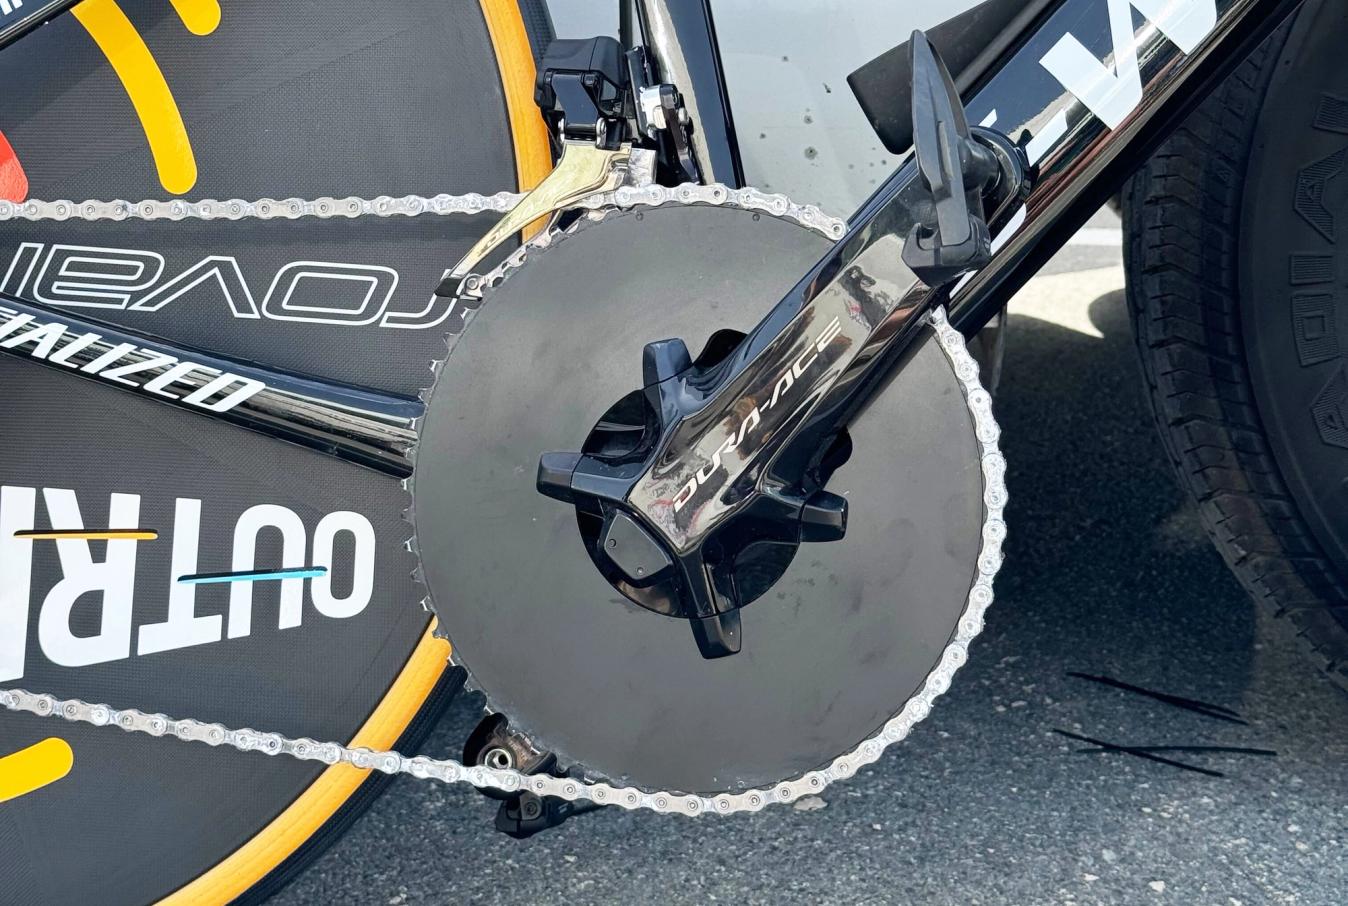 Shimano components dominate the WorldTour peloton and its groupsets are used by 14 of the 18 teams. However, the brand doesn’t offer a 1x groupset as standard, which is why most teams swapped in different chainrings